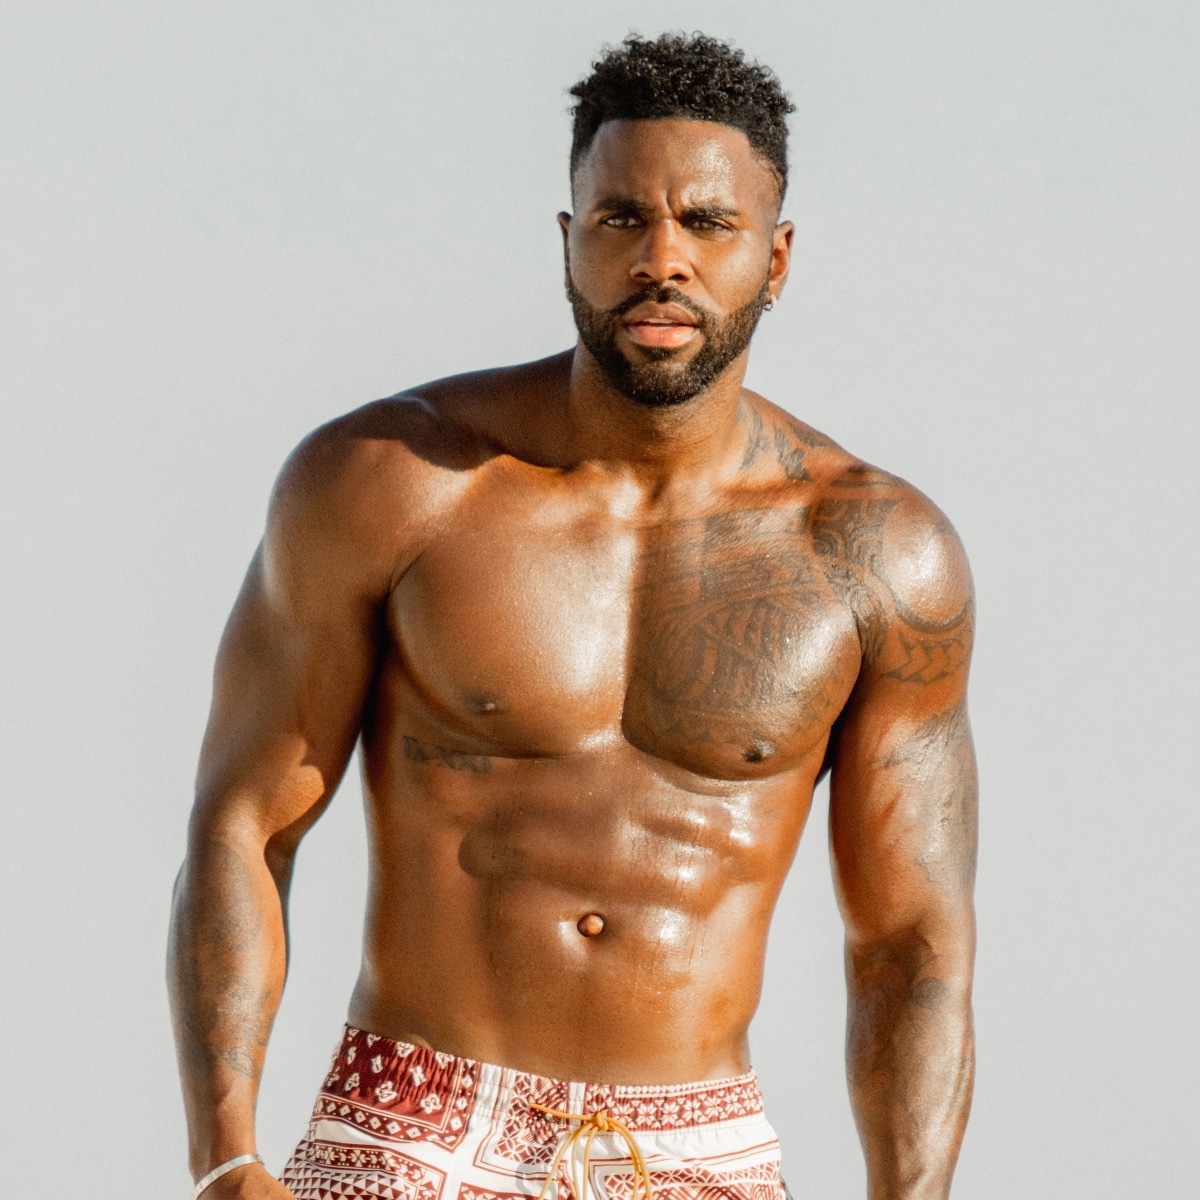 Aspiring Singer Accuses Jason Derulo of Sexual Harassment and Intimidation in Lawsuit